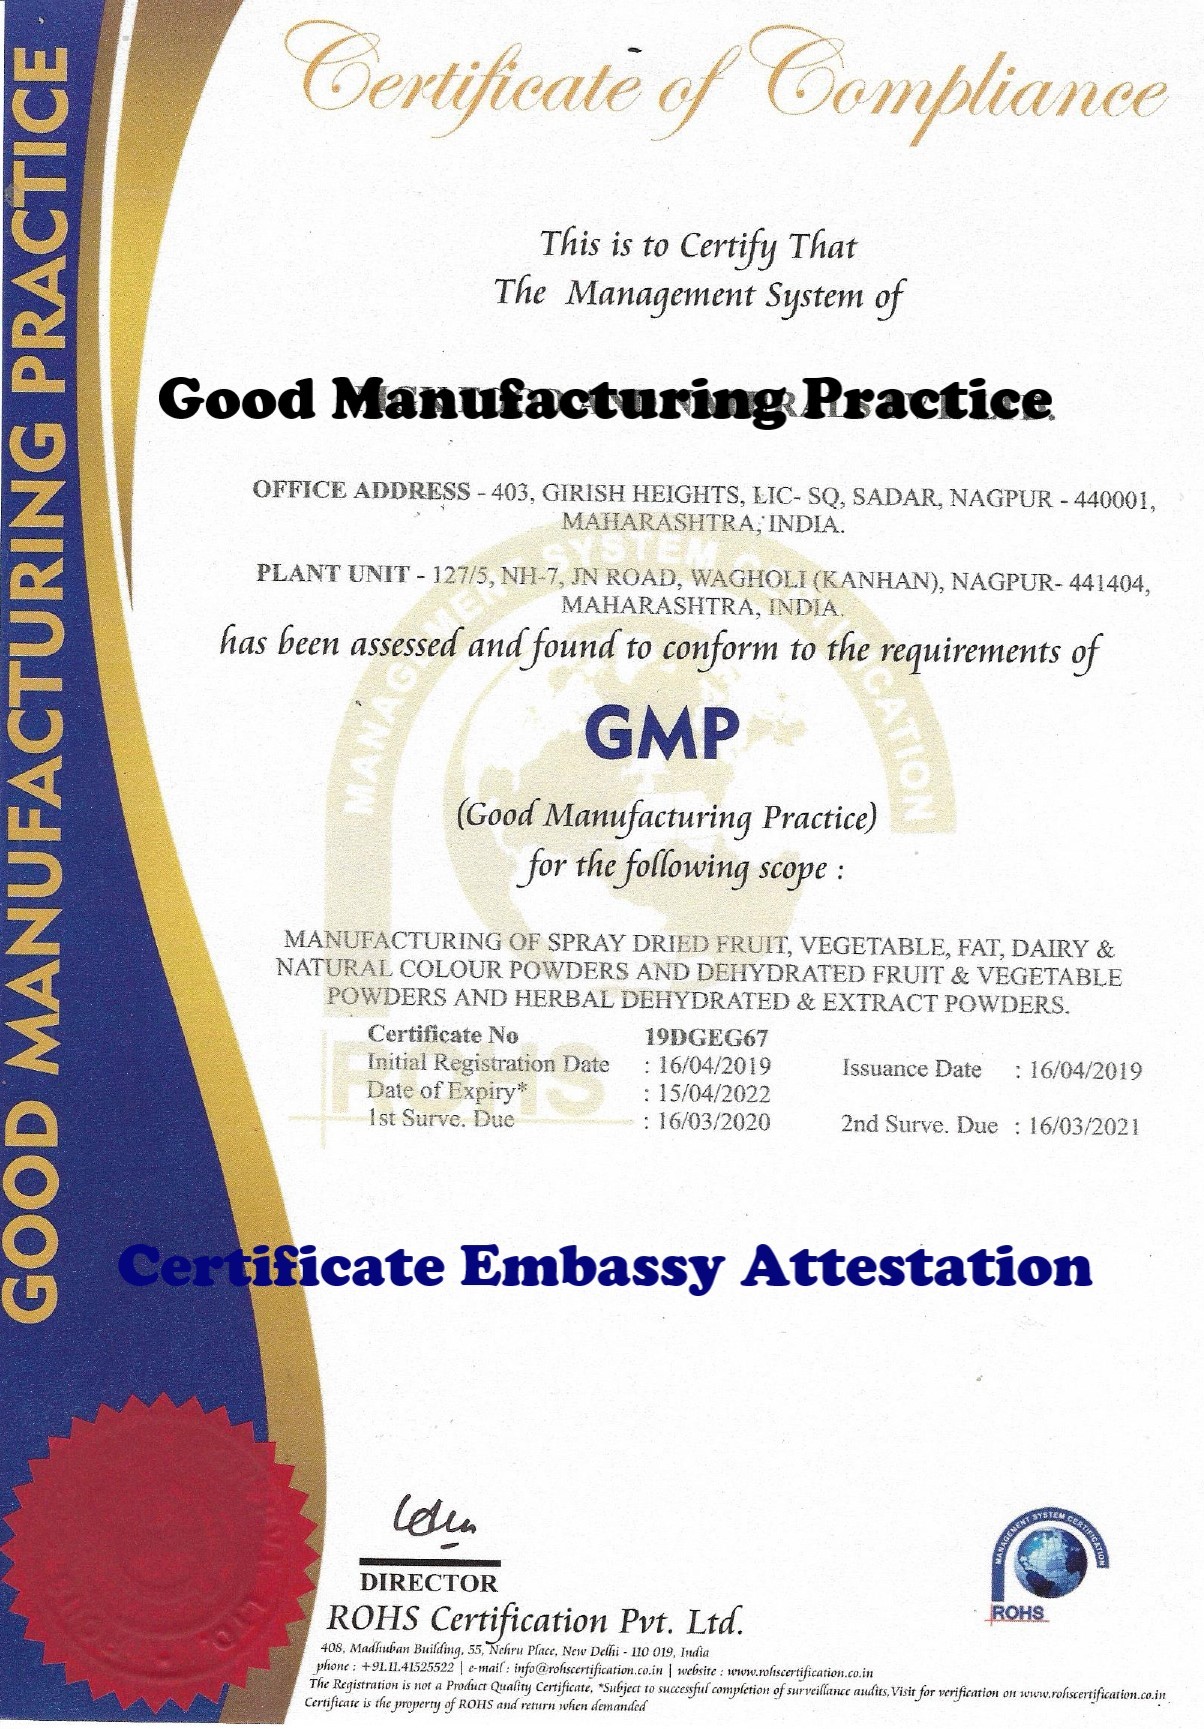 GMP Certificate Attestation from Luxembourg Embassy